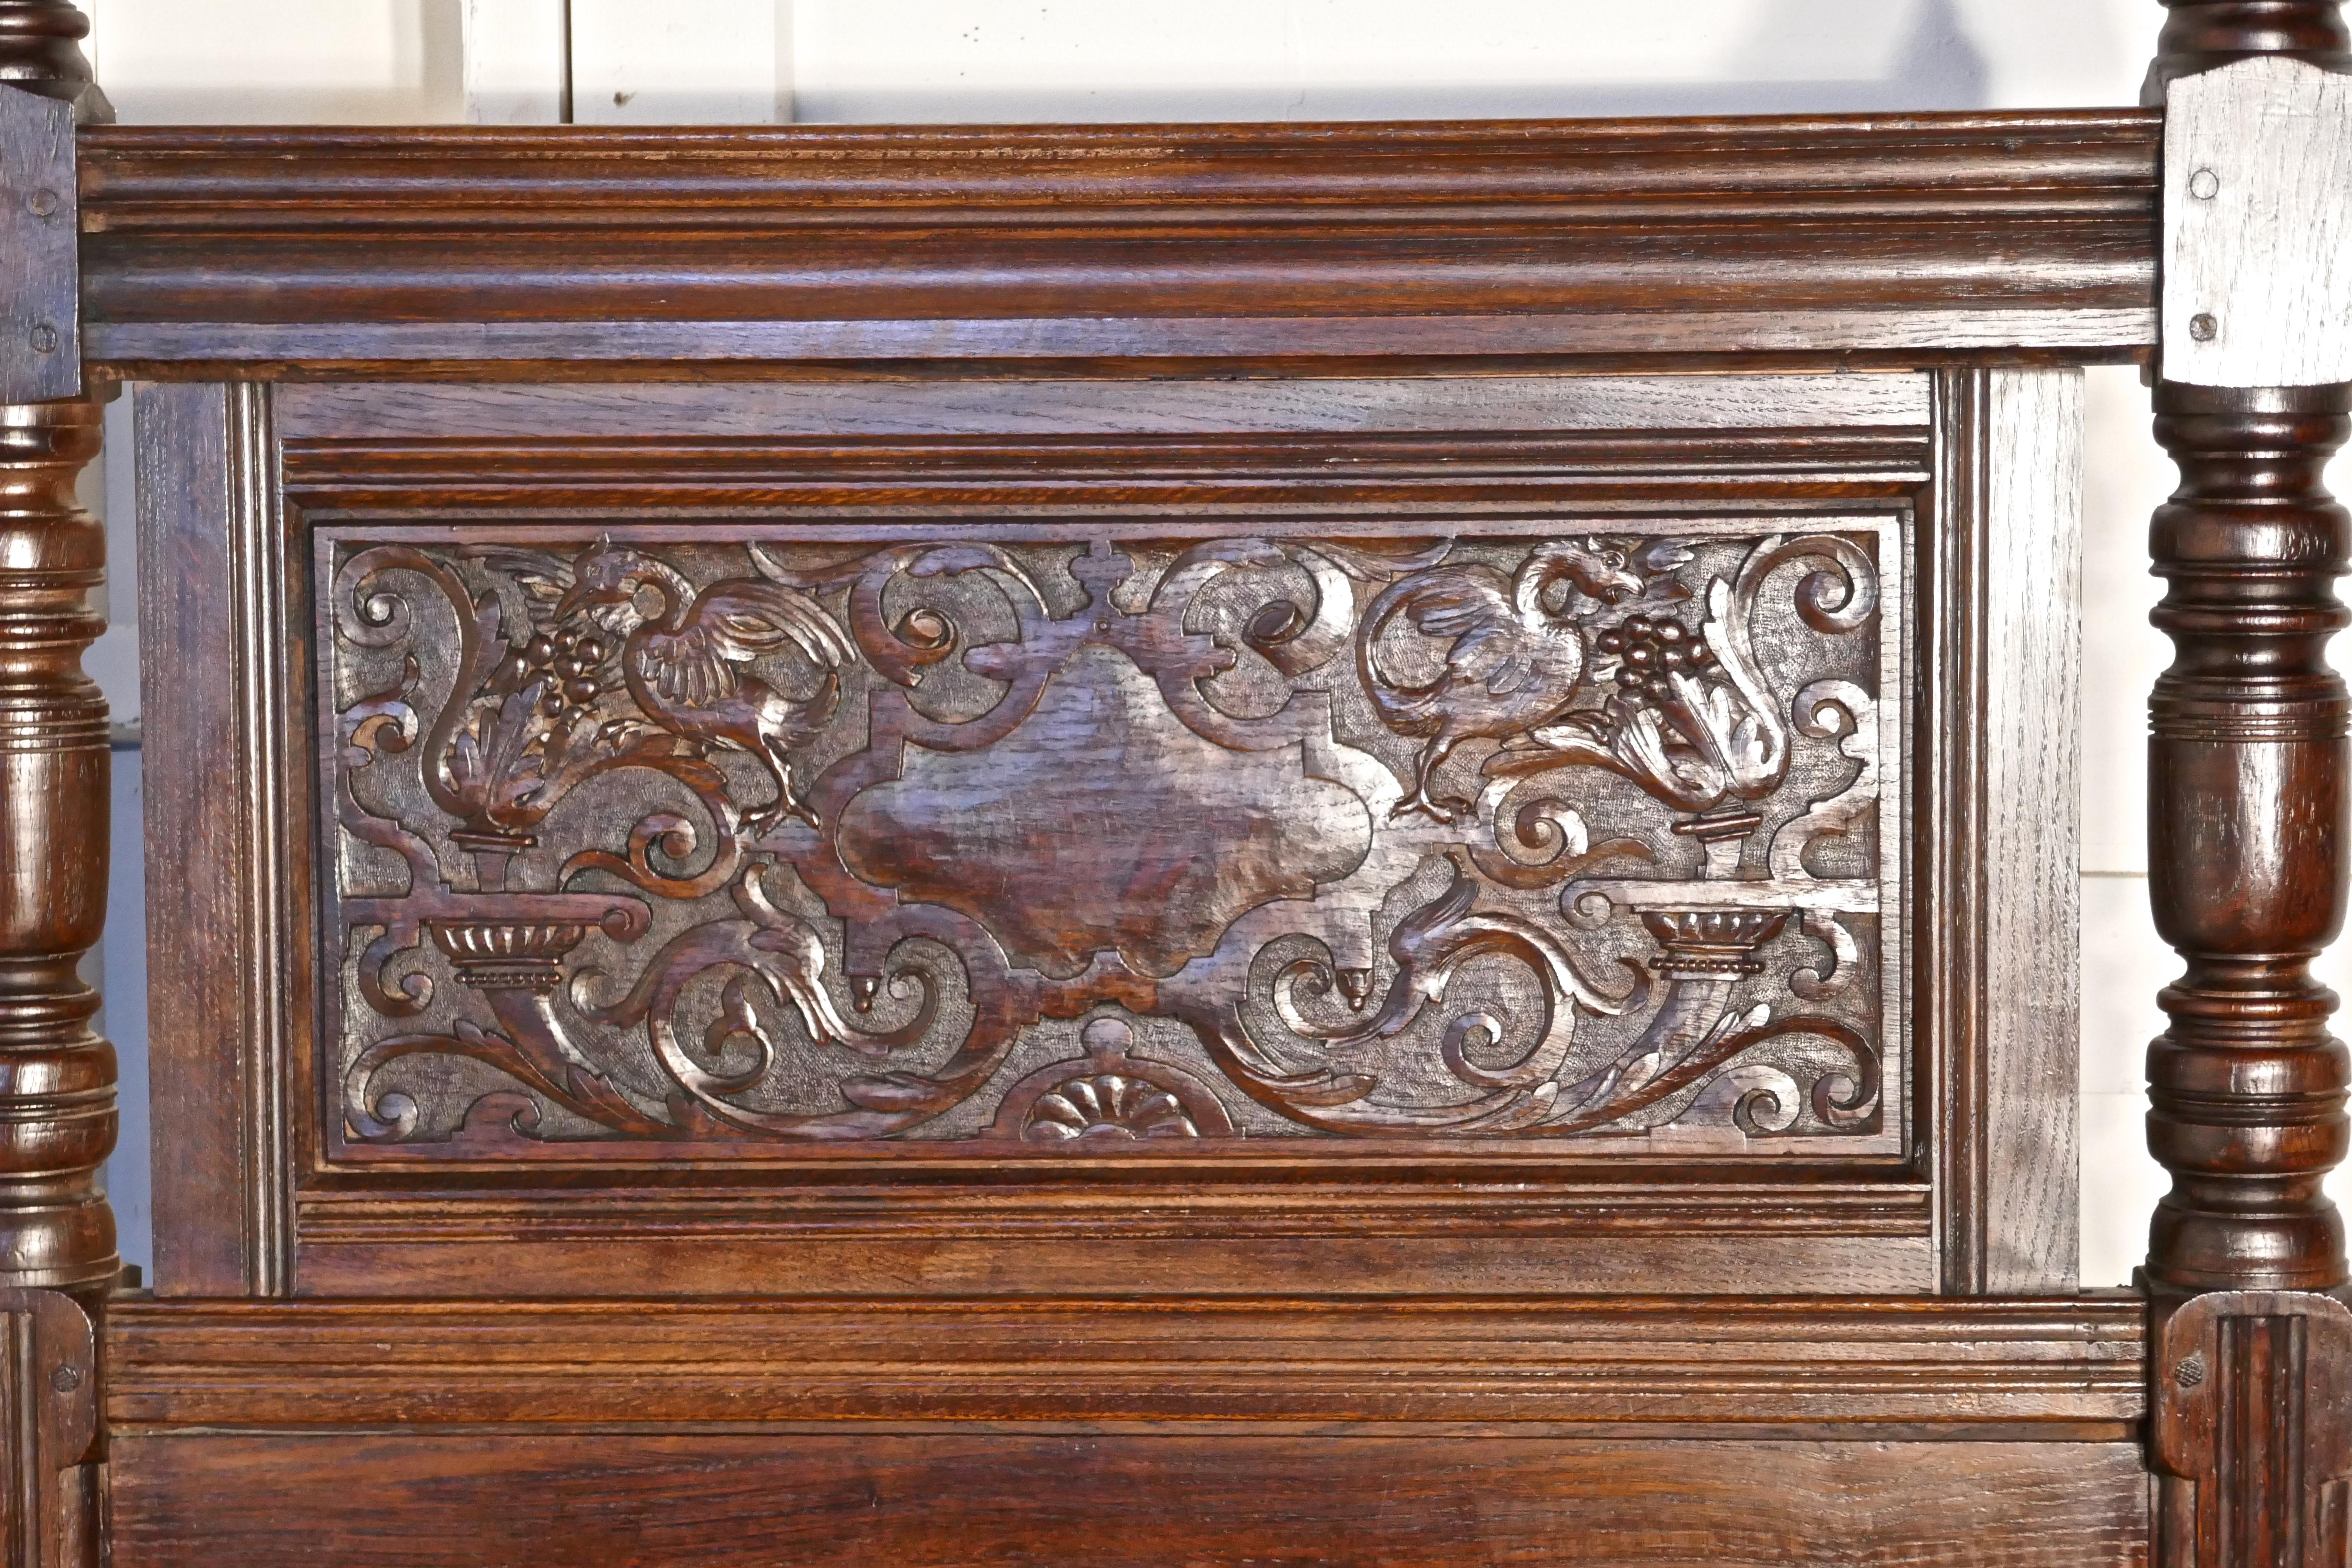 Gothic high carved oak single bed

This Gothic style panelled oak bed has an exquisitely carved headboard, depicting mythical beasts and twining leaves

Both the head and foot board of the bed have turned posts at each side with chunky knobs on